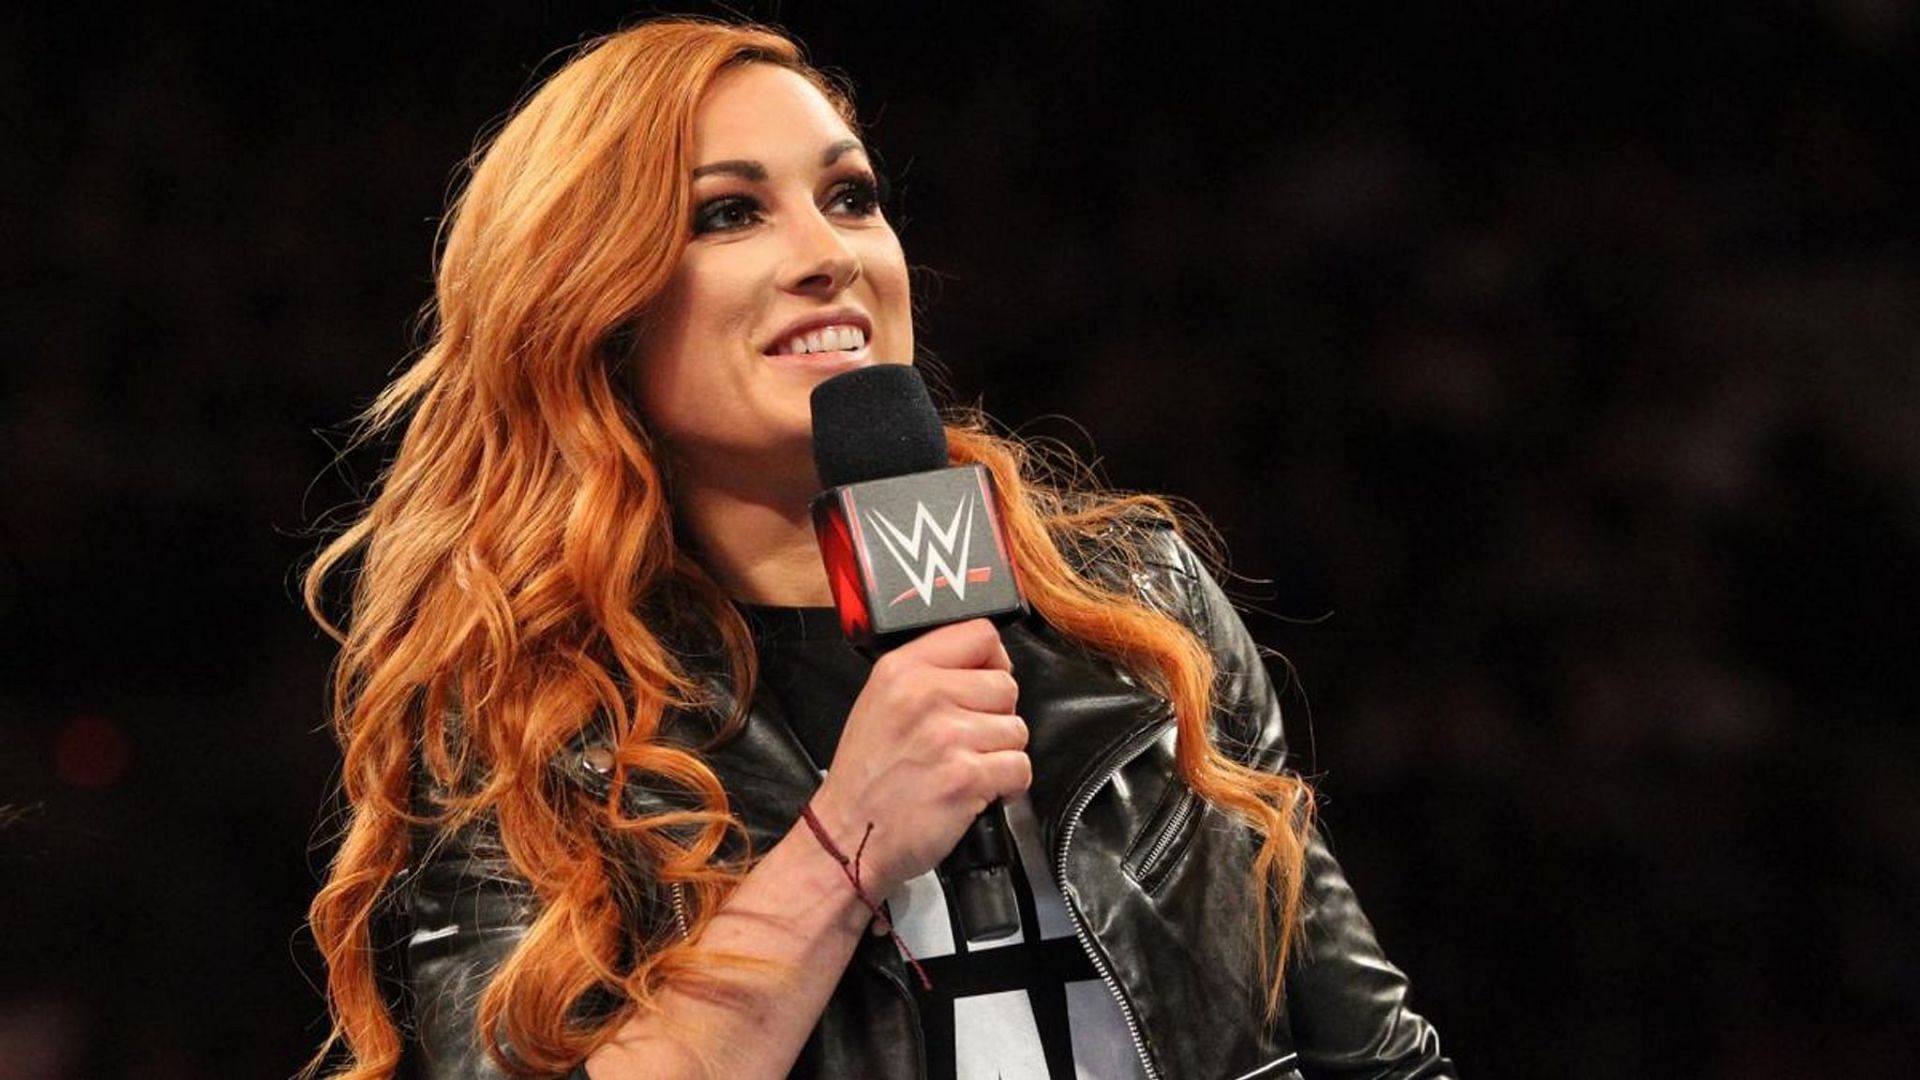 Becky Lynch mocked her opponent during a WWE show.